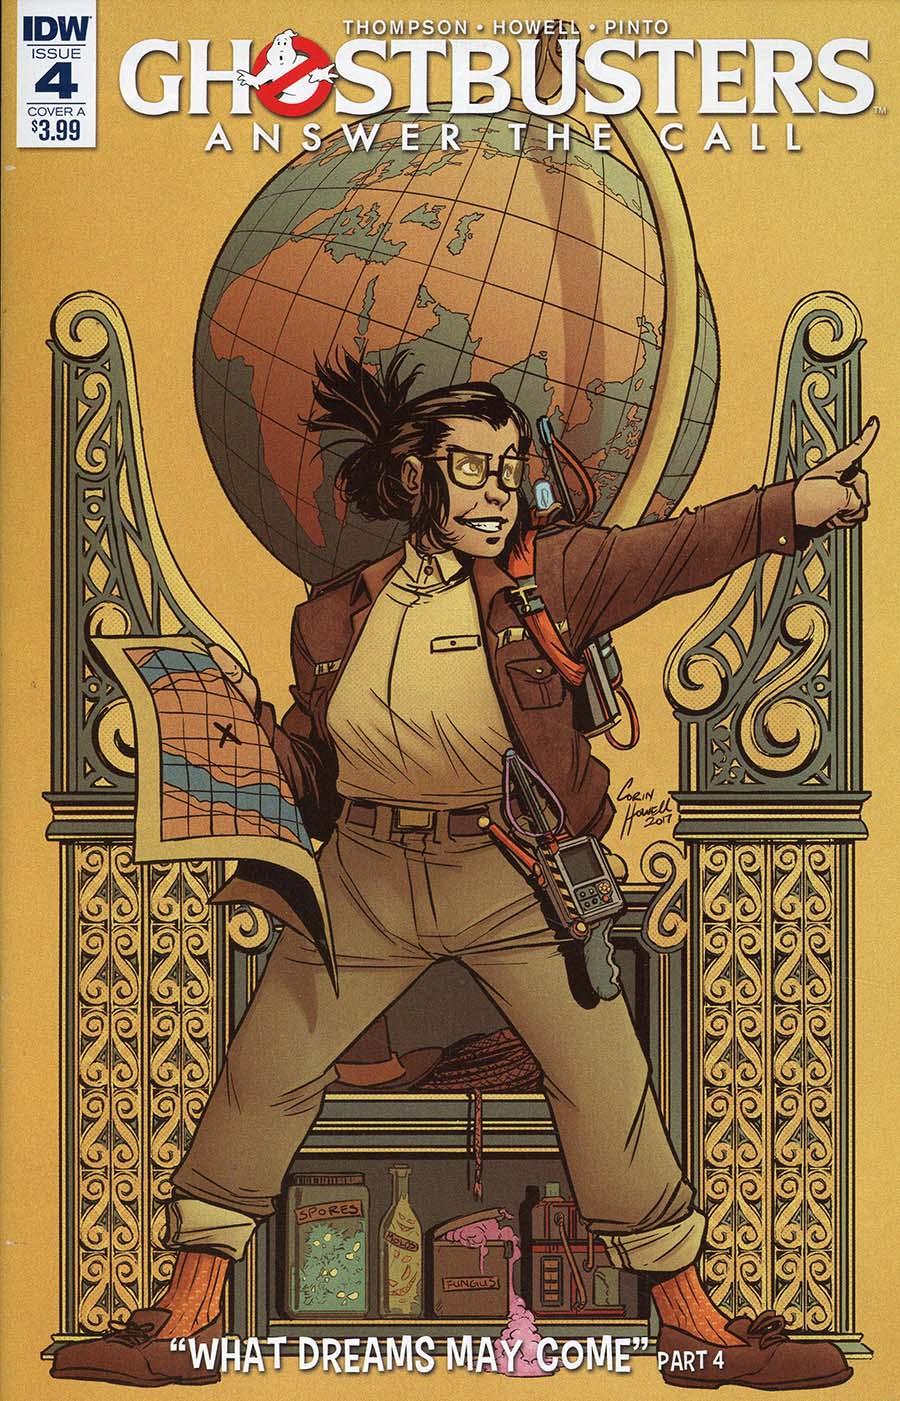 Ghostbusters Answer The Call Vol. 1 #4